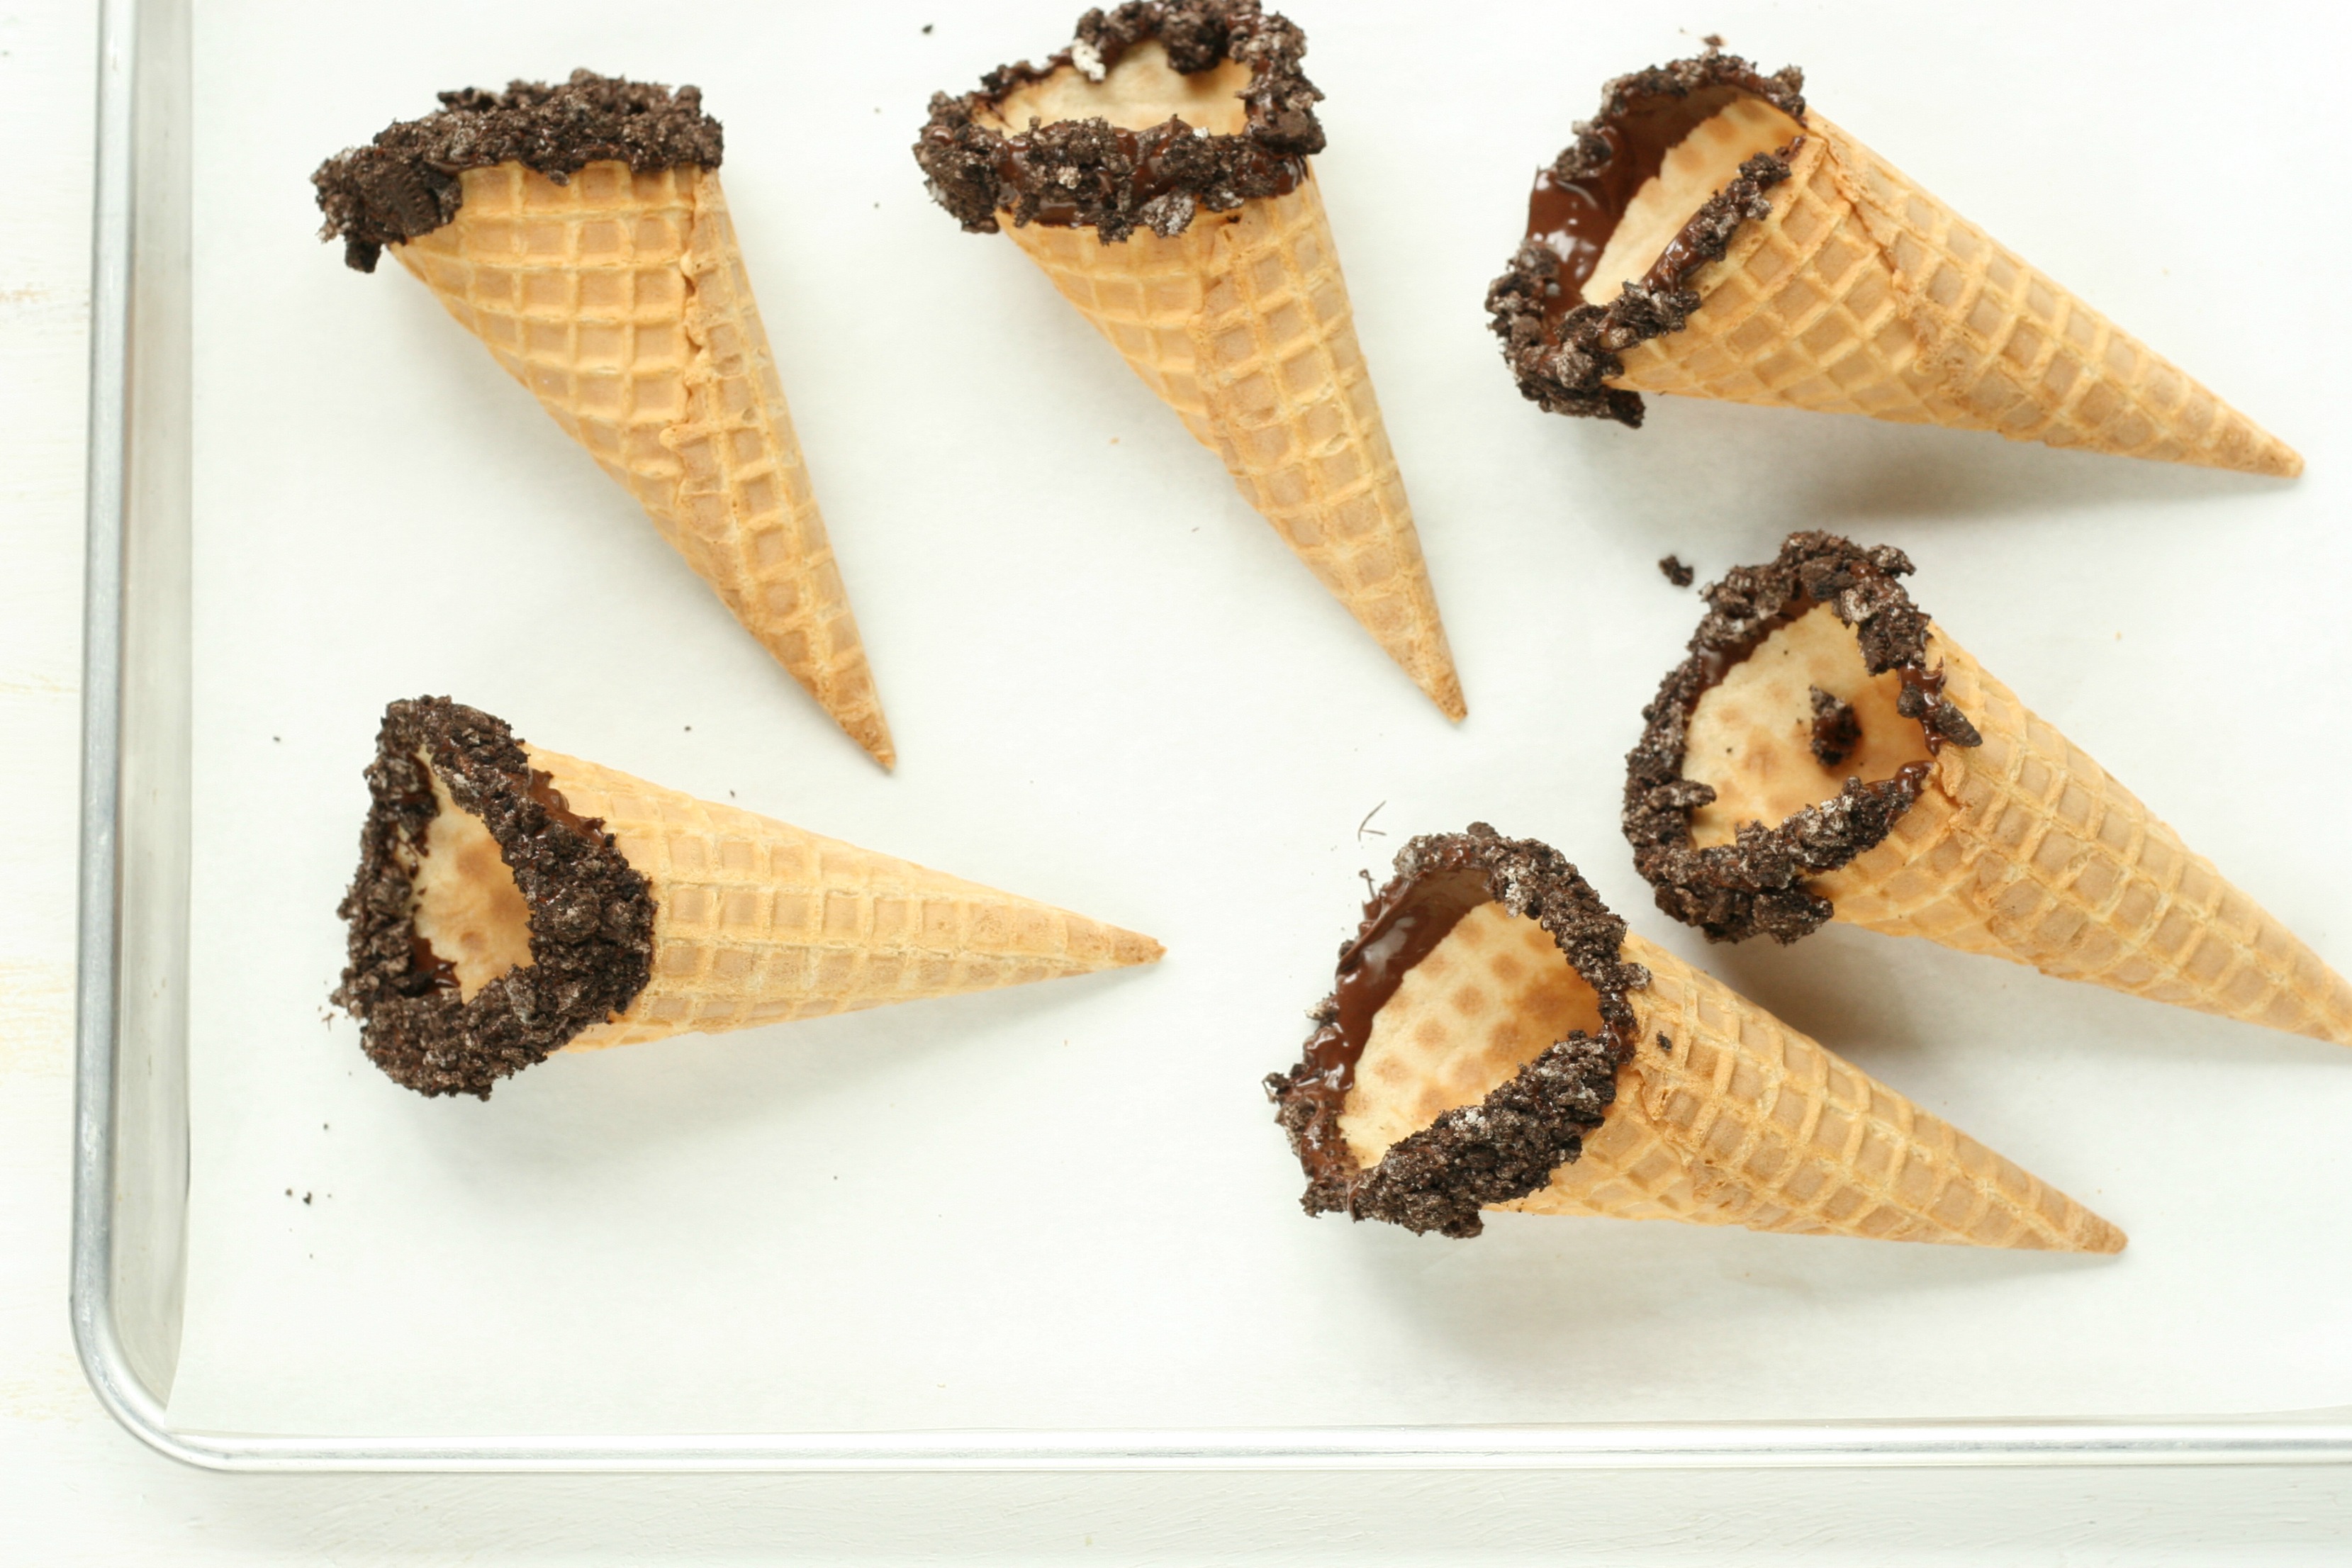 sheet pan of store bought waffle cones dipped in chocolate and rolled in crushed Oreo cookie crumbs.